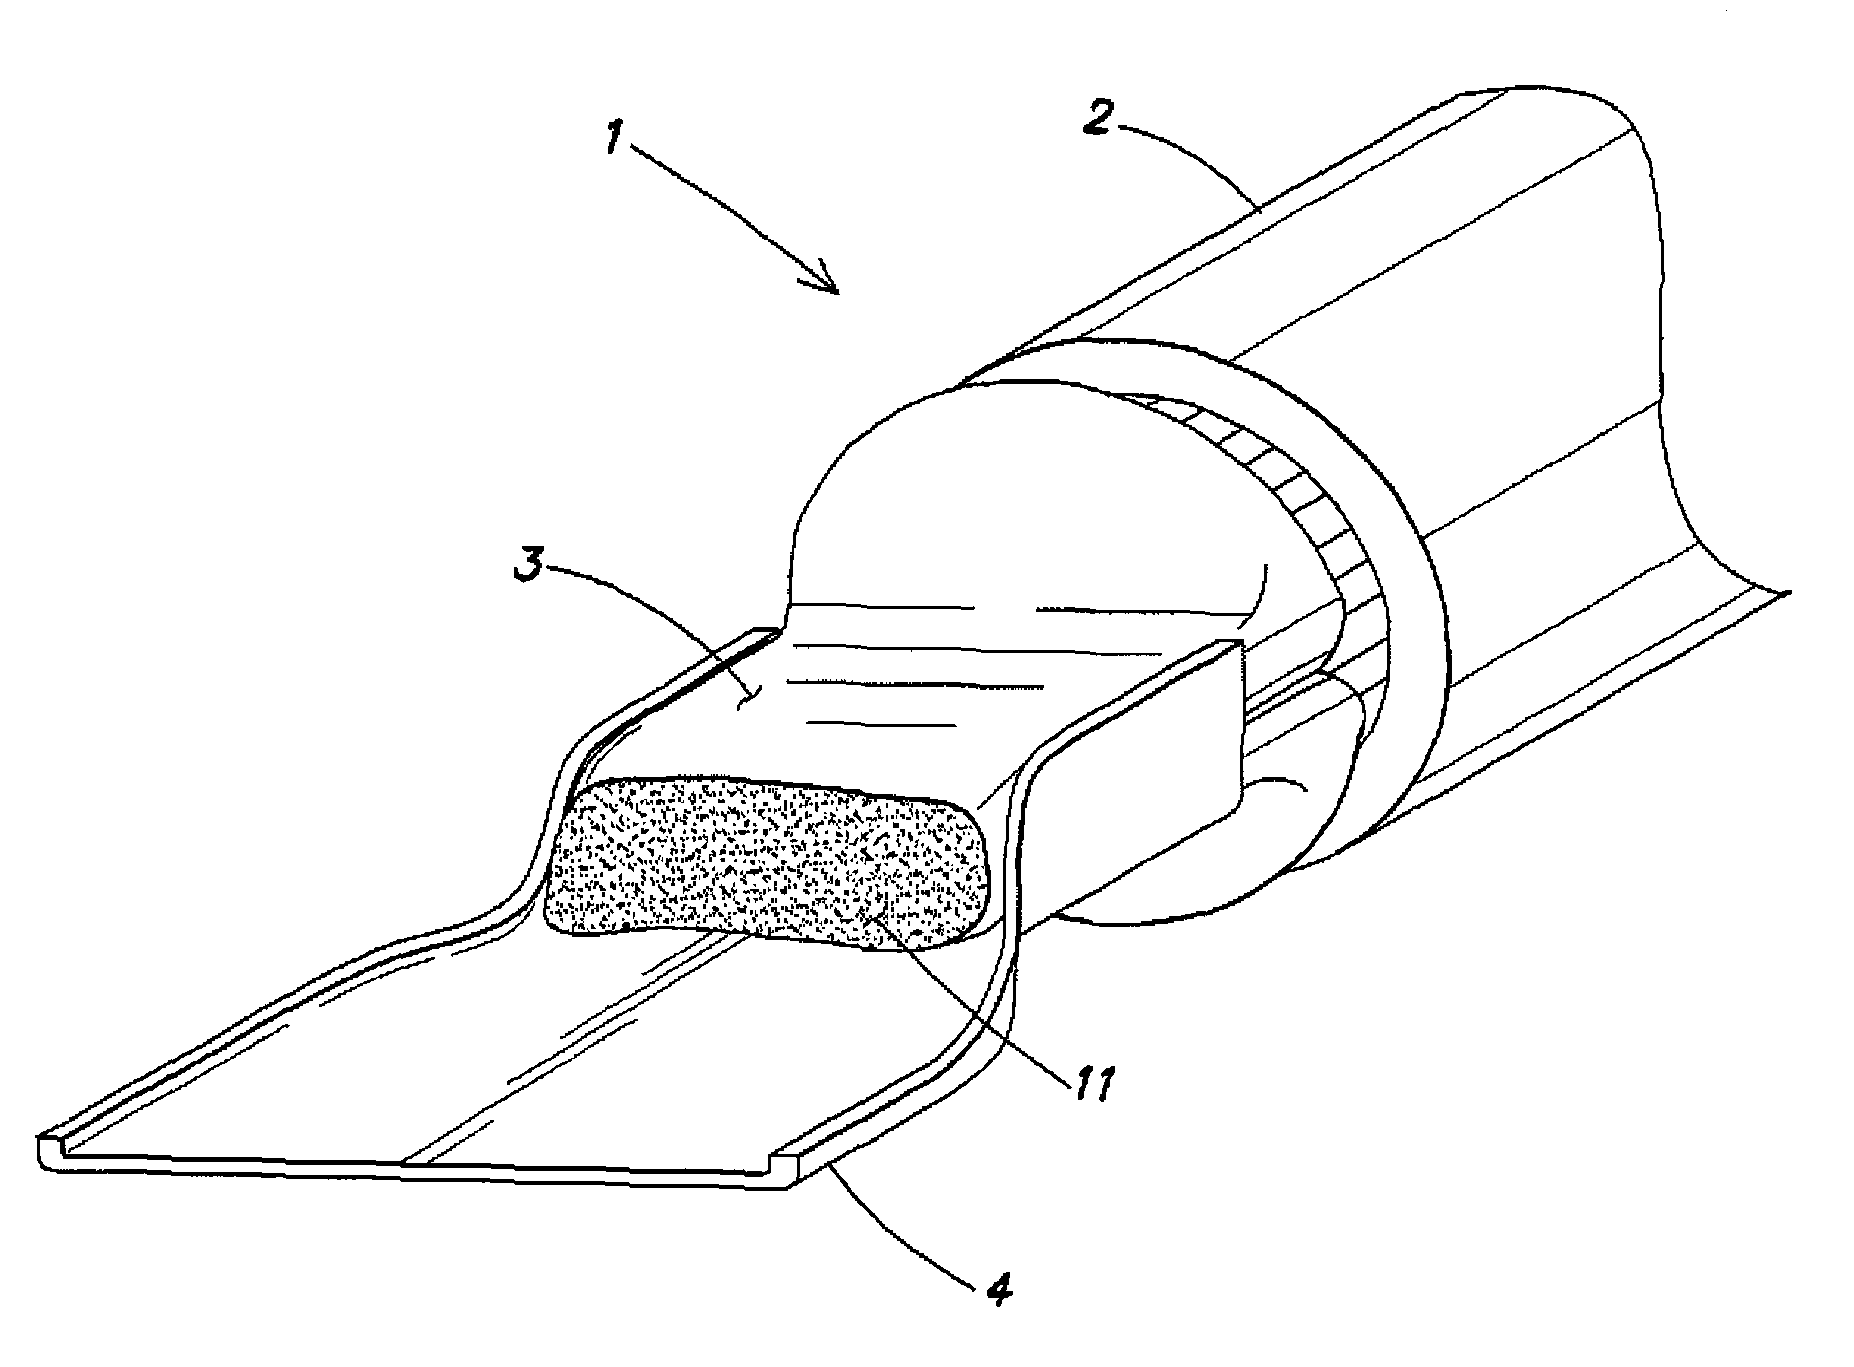 Connector for use with light-weight metal conductors